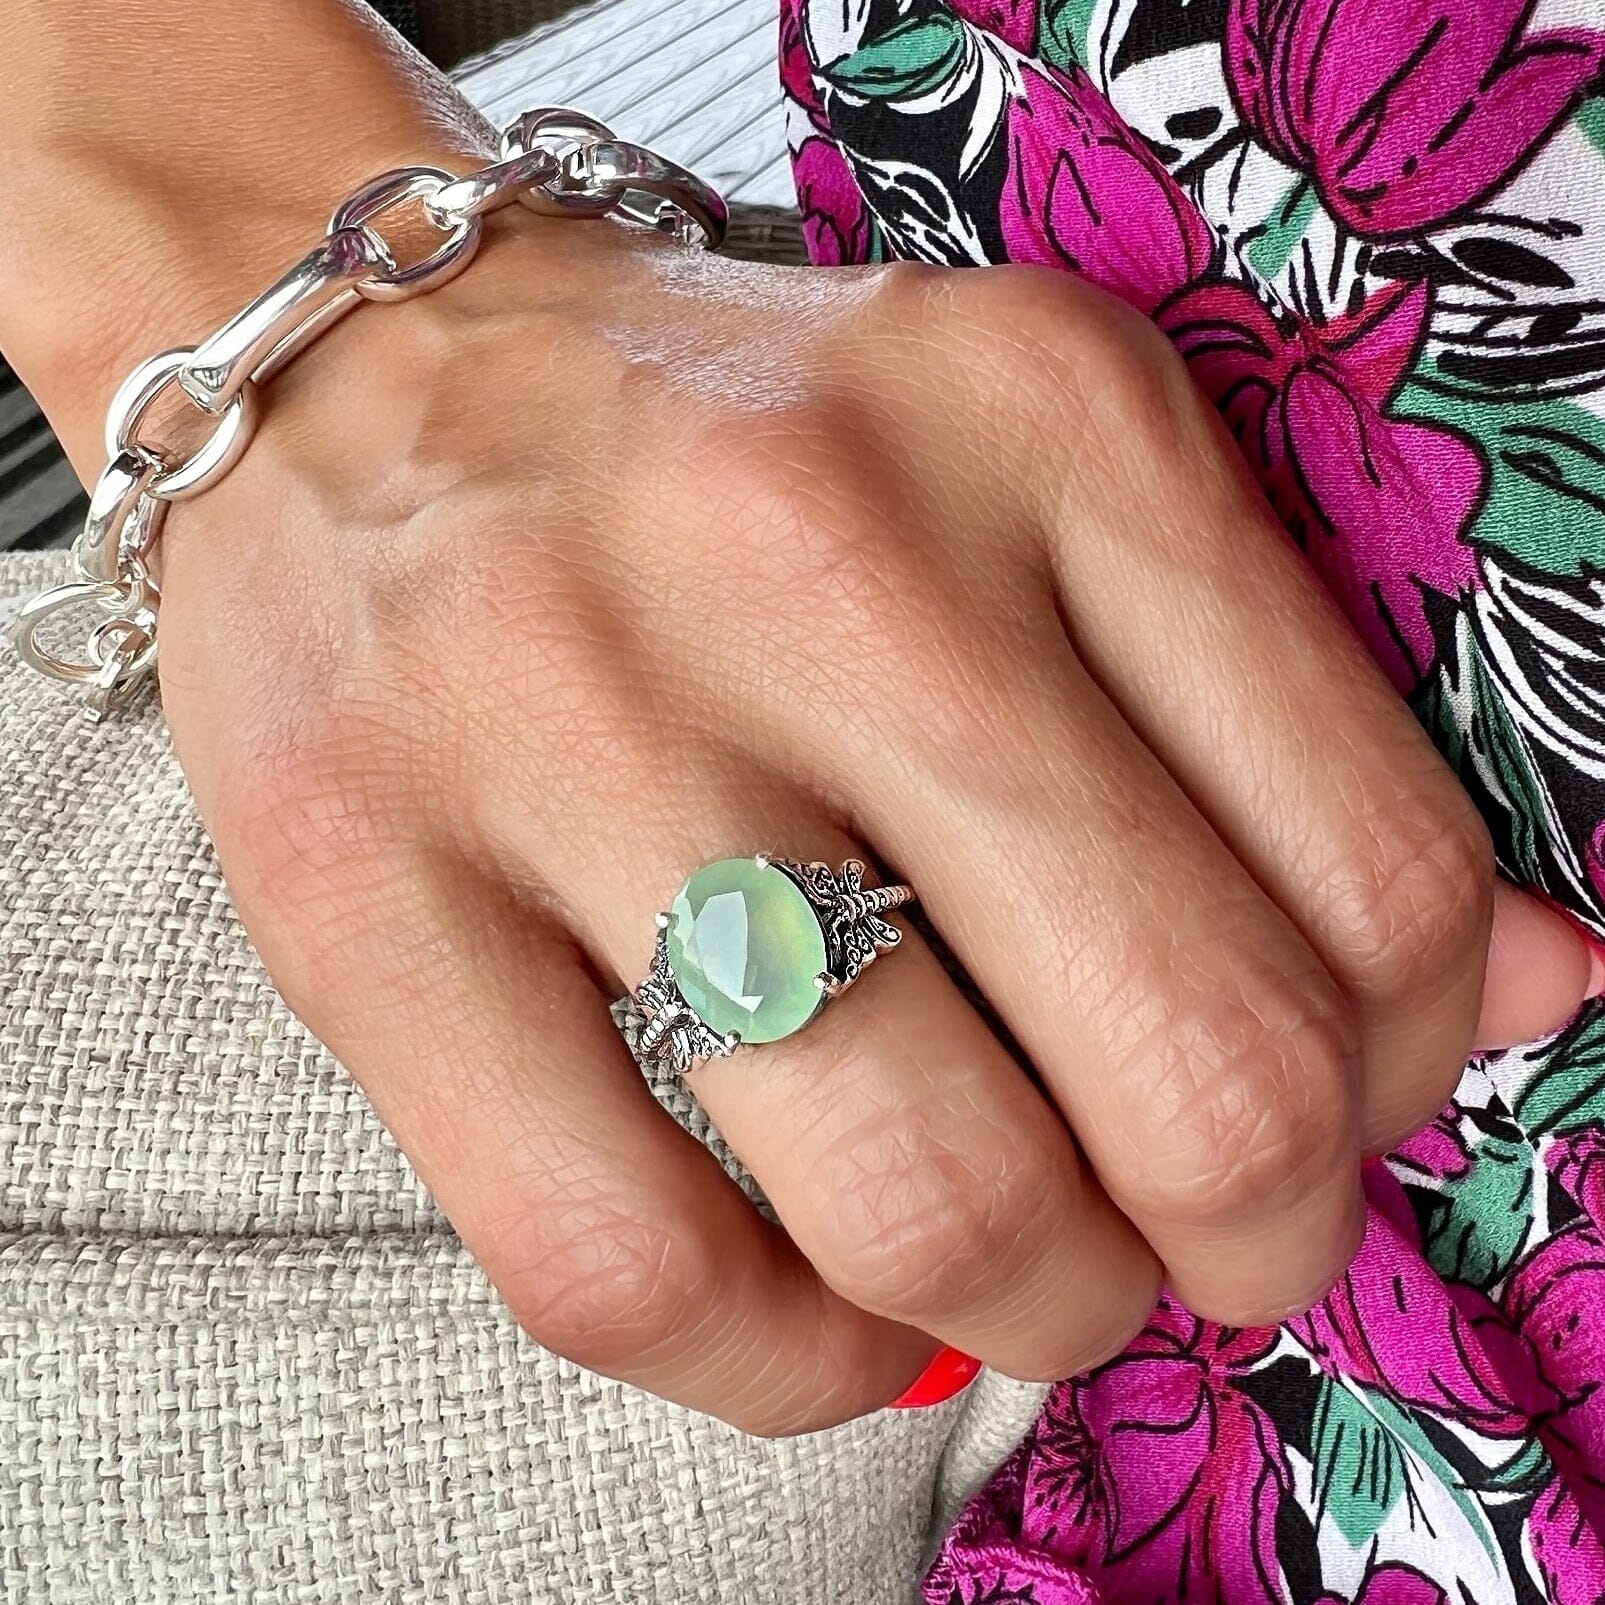 Honeydew ring paired with Linked Up Bracelet